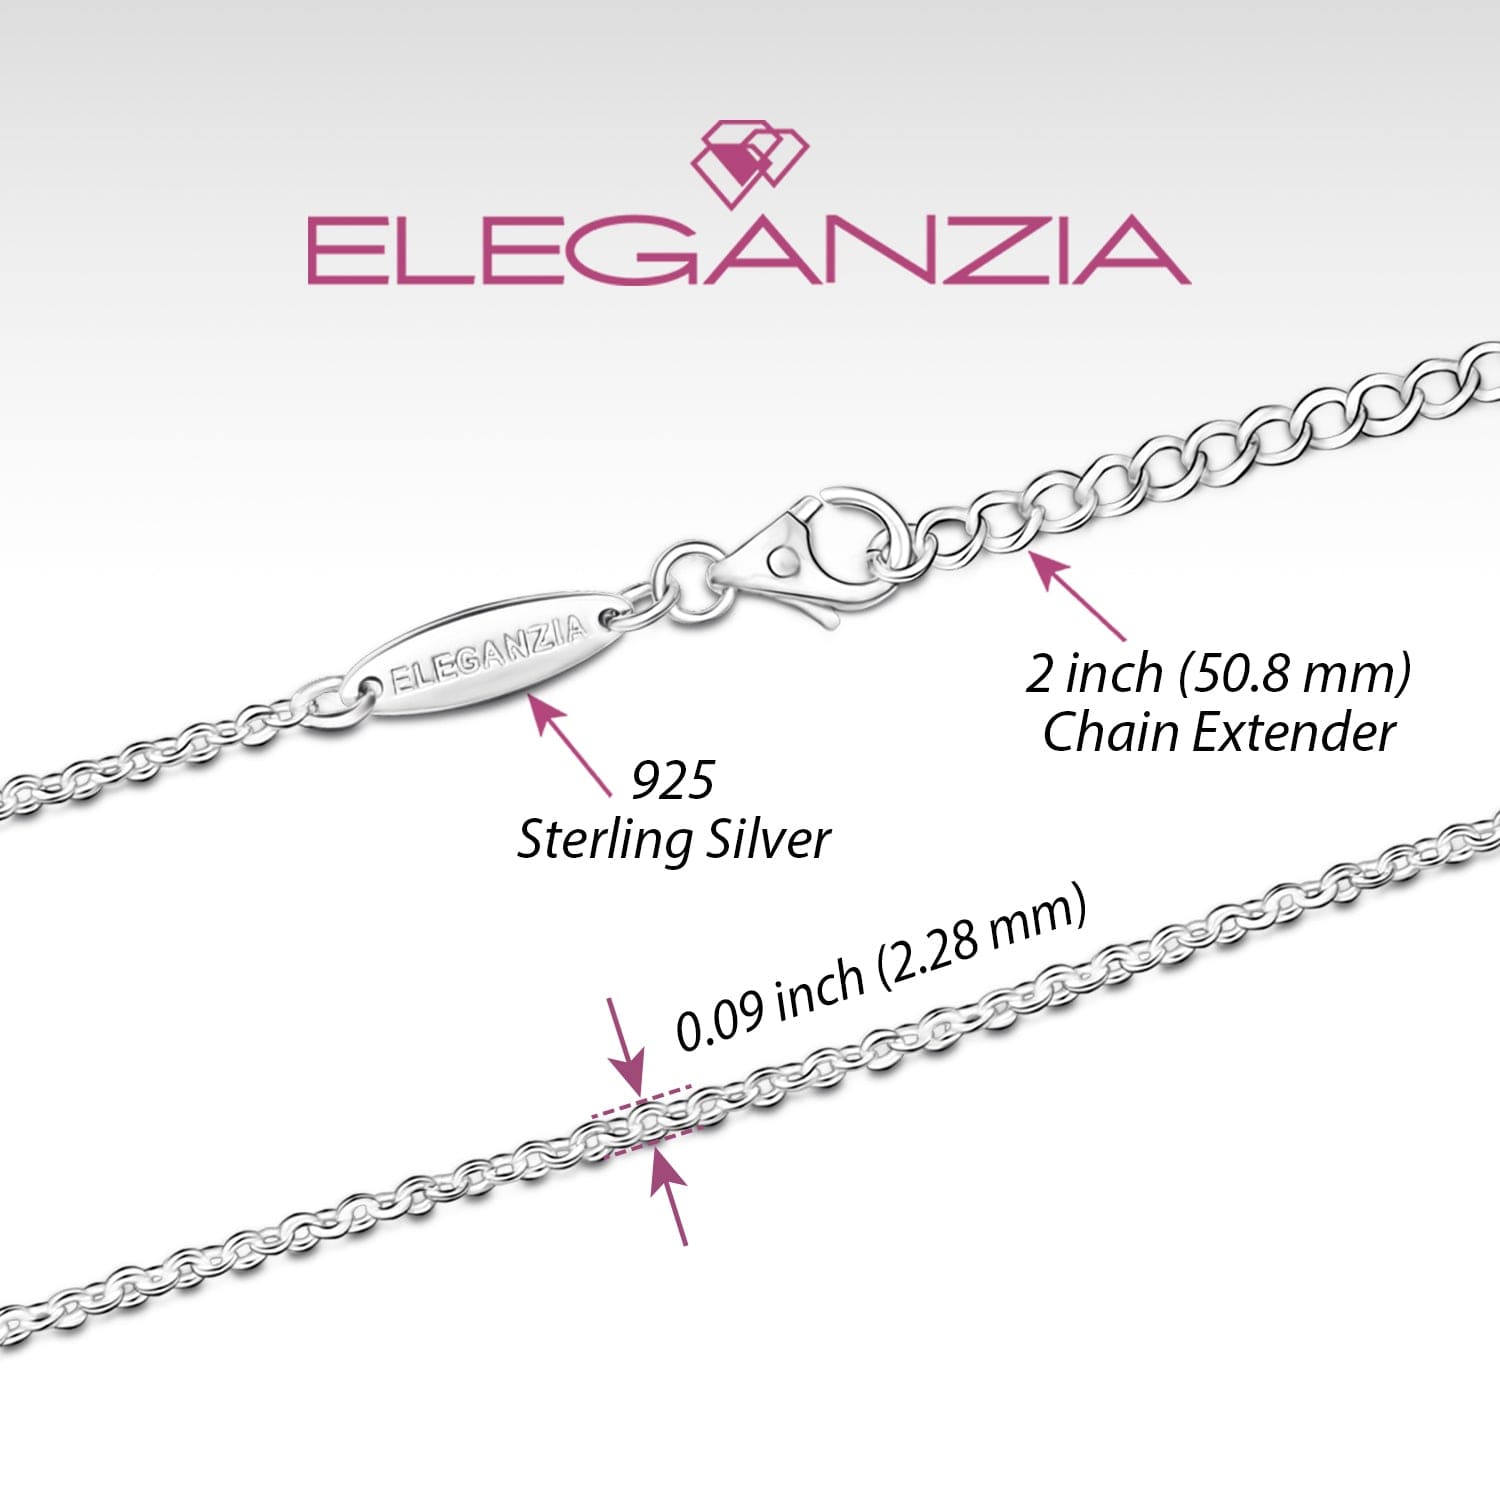 Necklace Chain Extender in Solid Sterling Silver